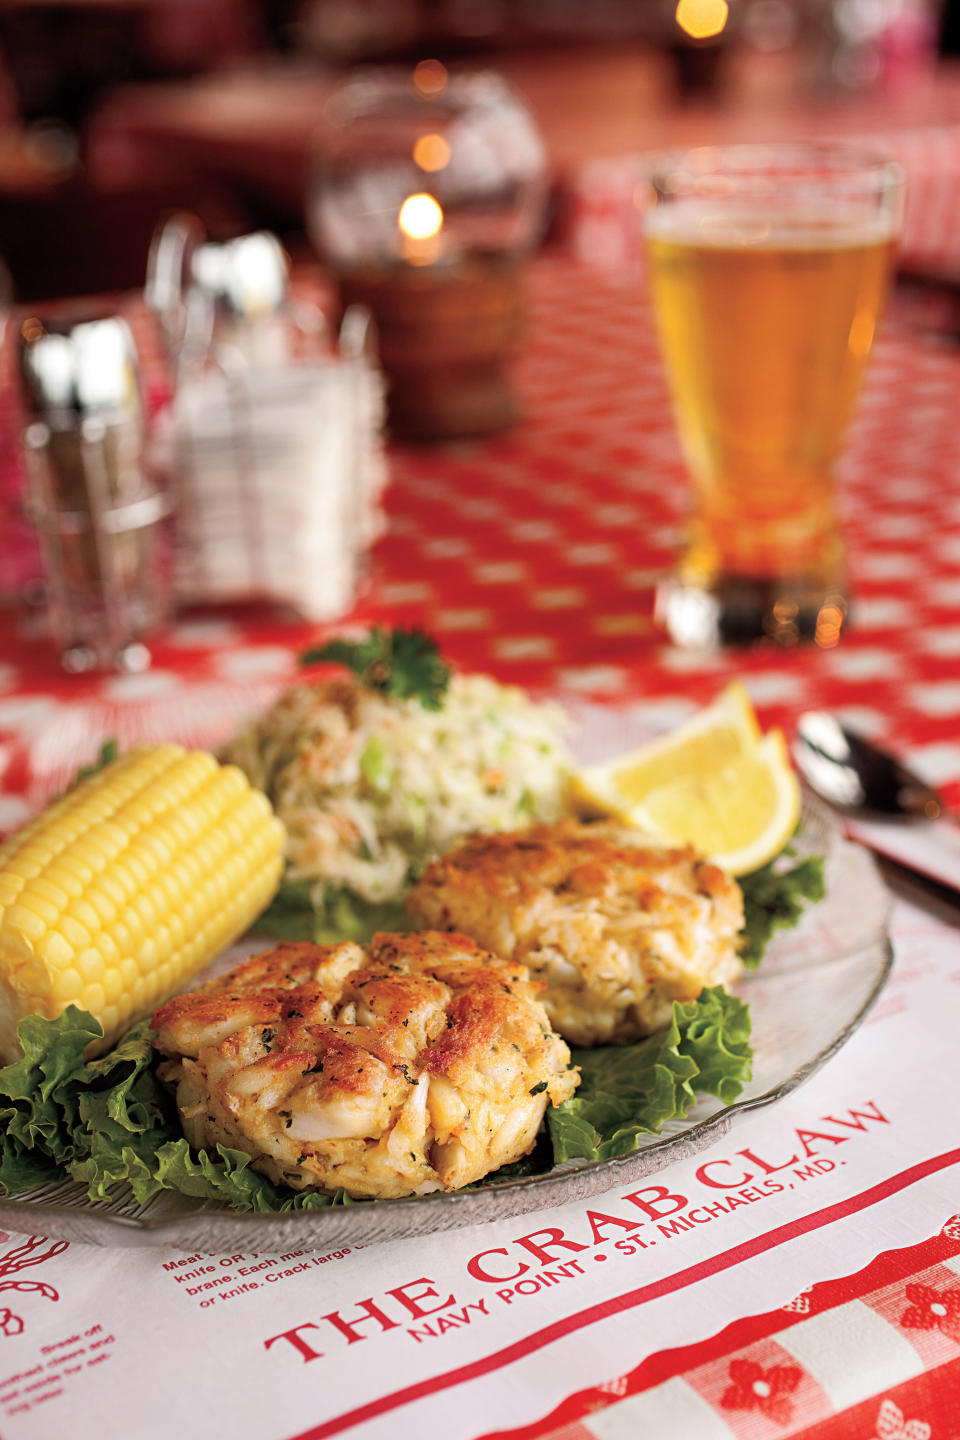 Best Crab Cake in Maryland